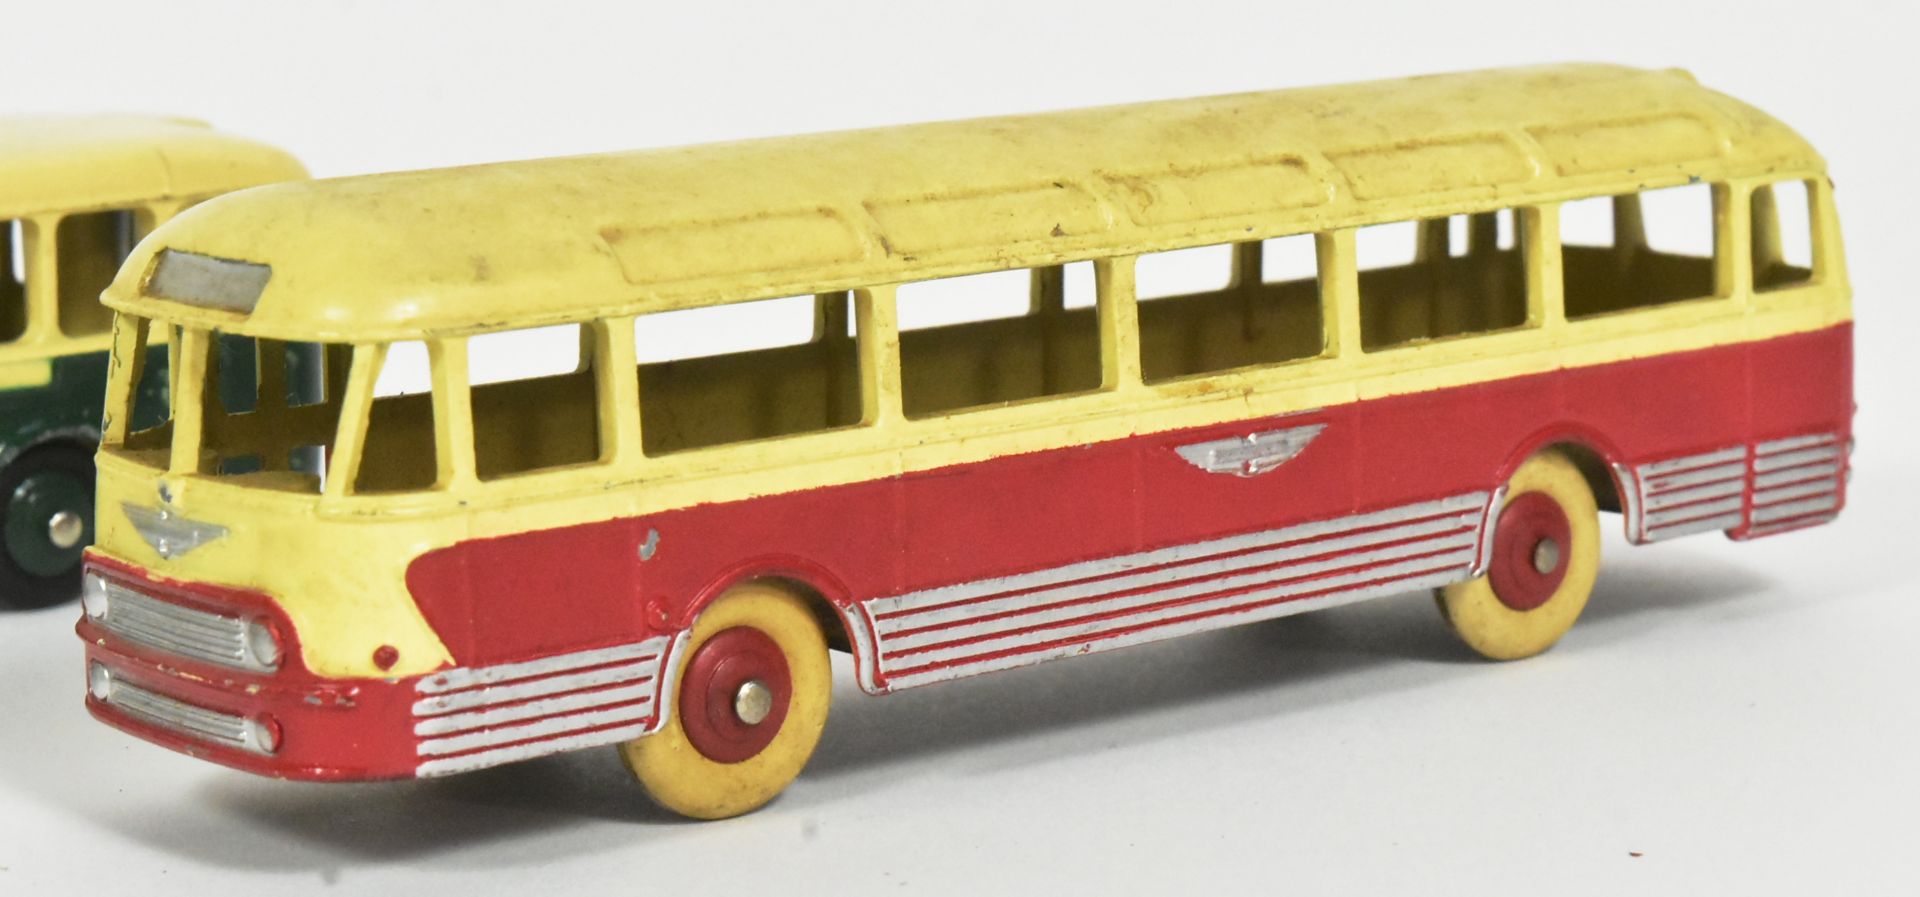 DIECAST - FRENCH DINKY TOYS - CHAUSSON & SOMUA BUSES - Image 2 of 6